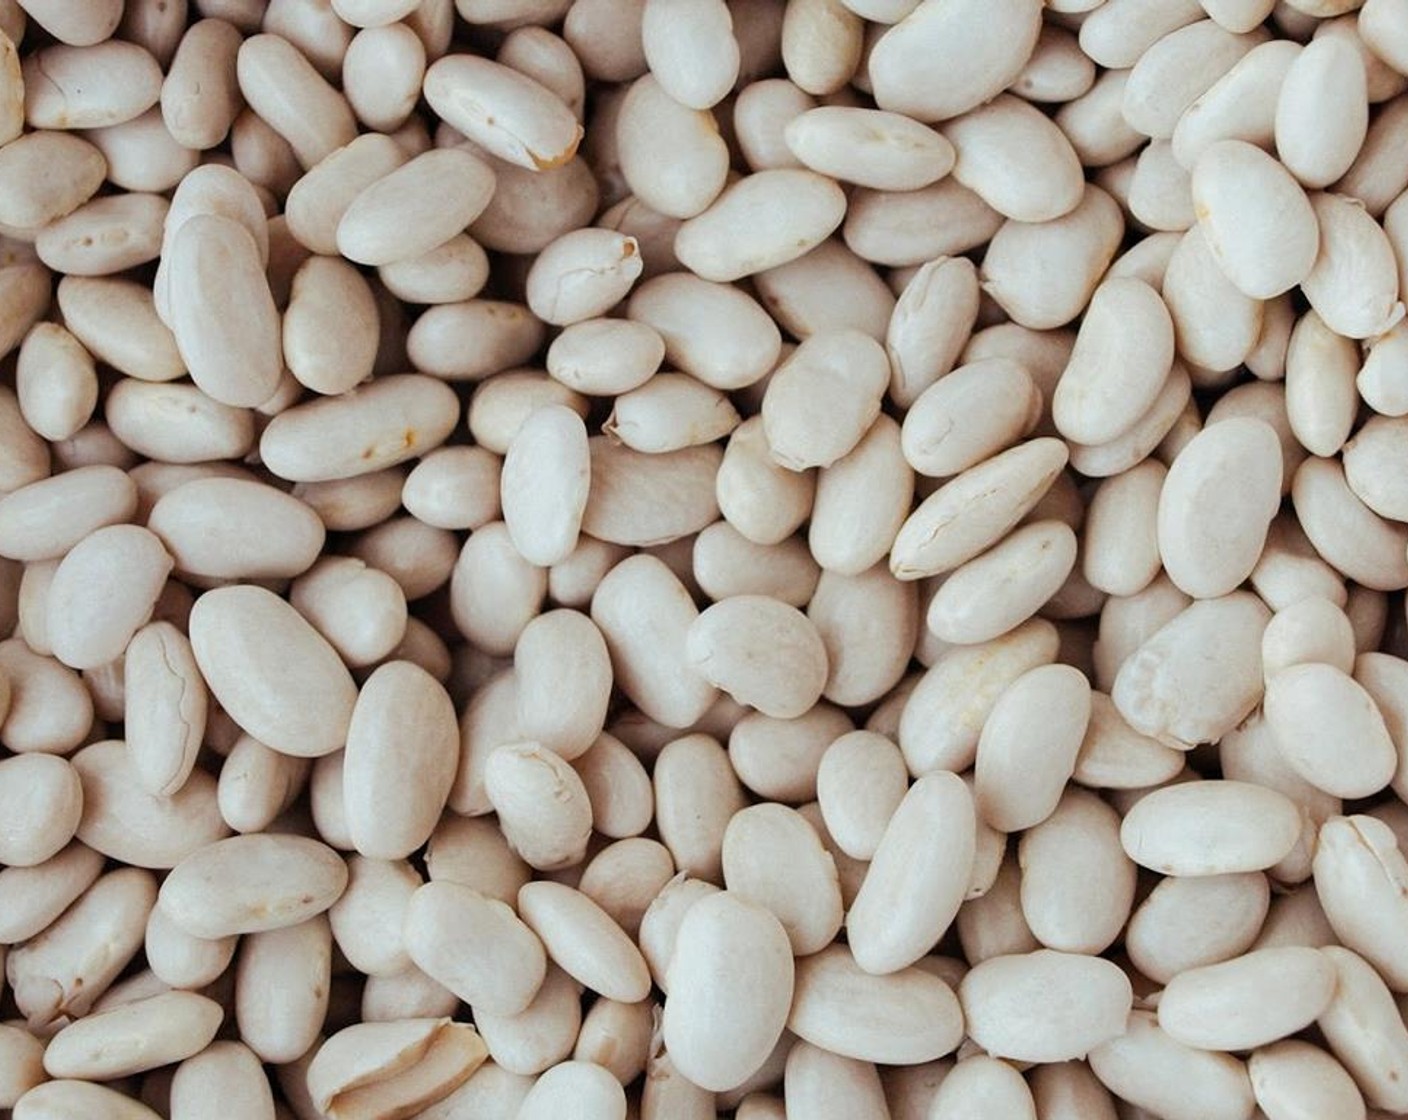 step 1 For Dry Great Northern Beans (2 1/4 cups) wash and remove any beans or pebbles. Soak beans overnight or quick soak them according to package directions. Drain and rinse beans well. Place in a bowl until ready to use. If using canned beans, go on to the next step.